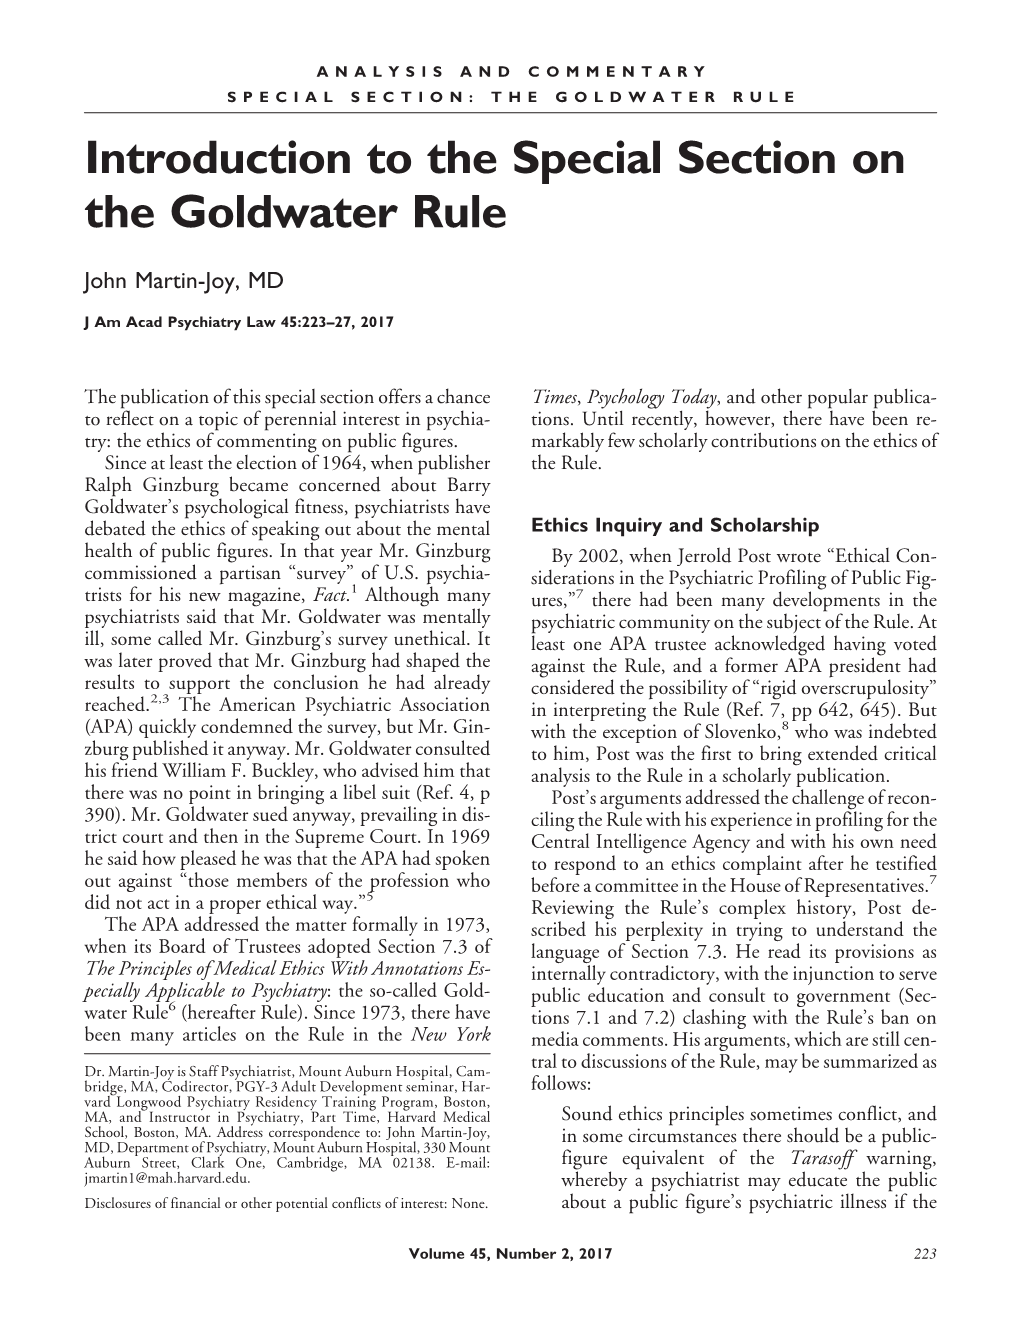 Introduction to the Special Section on the Goldwater Rule